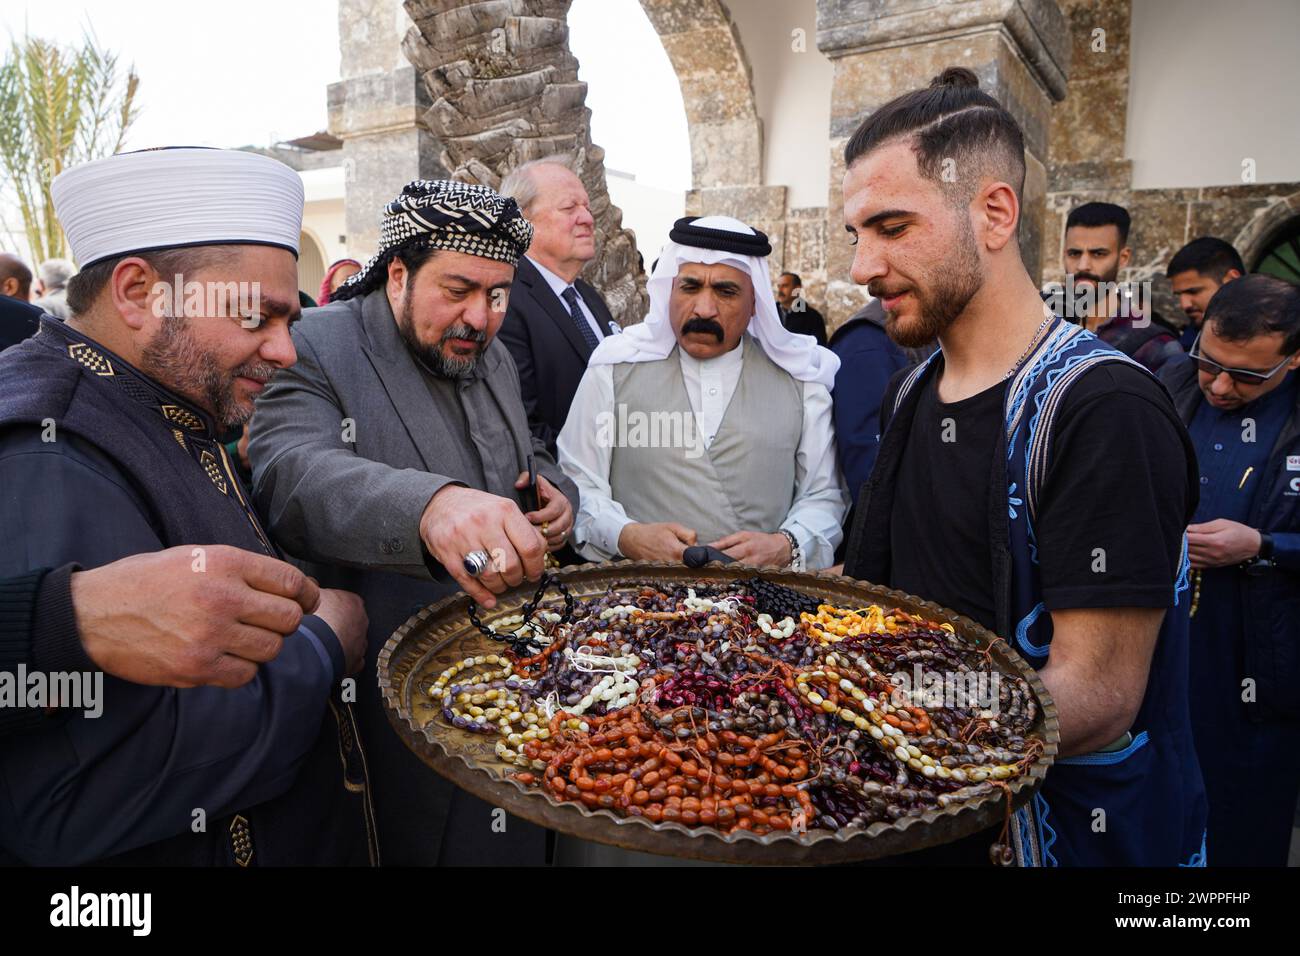 A young man distributes rosaries to people during the opening of Al-Masfi (Umayad) mosque in the old city of Mosul after completion of its restoration. The Umayad mosque also known Al-Masfi mosque is considered the oldest in Mosul, the second oldest mosque in Iraq, and the 5th oldest mosque in Islam. It dates back to the year 16 AH (637 AD). The mosque was damaged during the operations to liberate the city of Mosul from ISIS, and the mosque was reconstructed by the ALIPH organization in cooperation with LA GUILDE Association and Al-Tameer International Group, in cooperation with the Sunni Endo Stock Photo